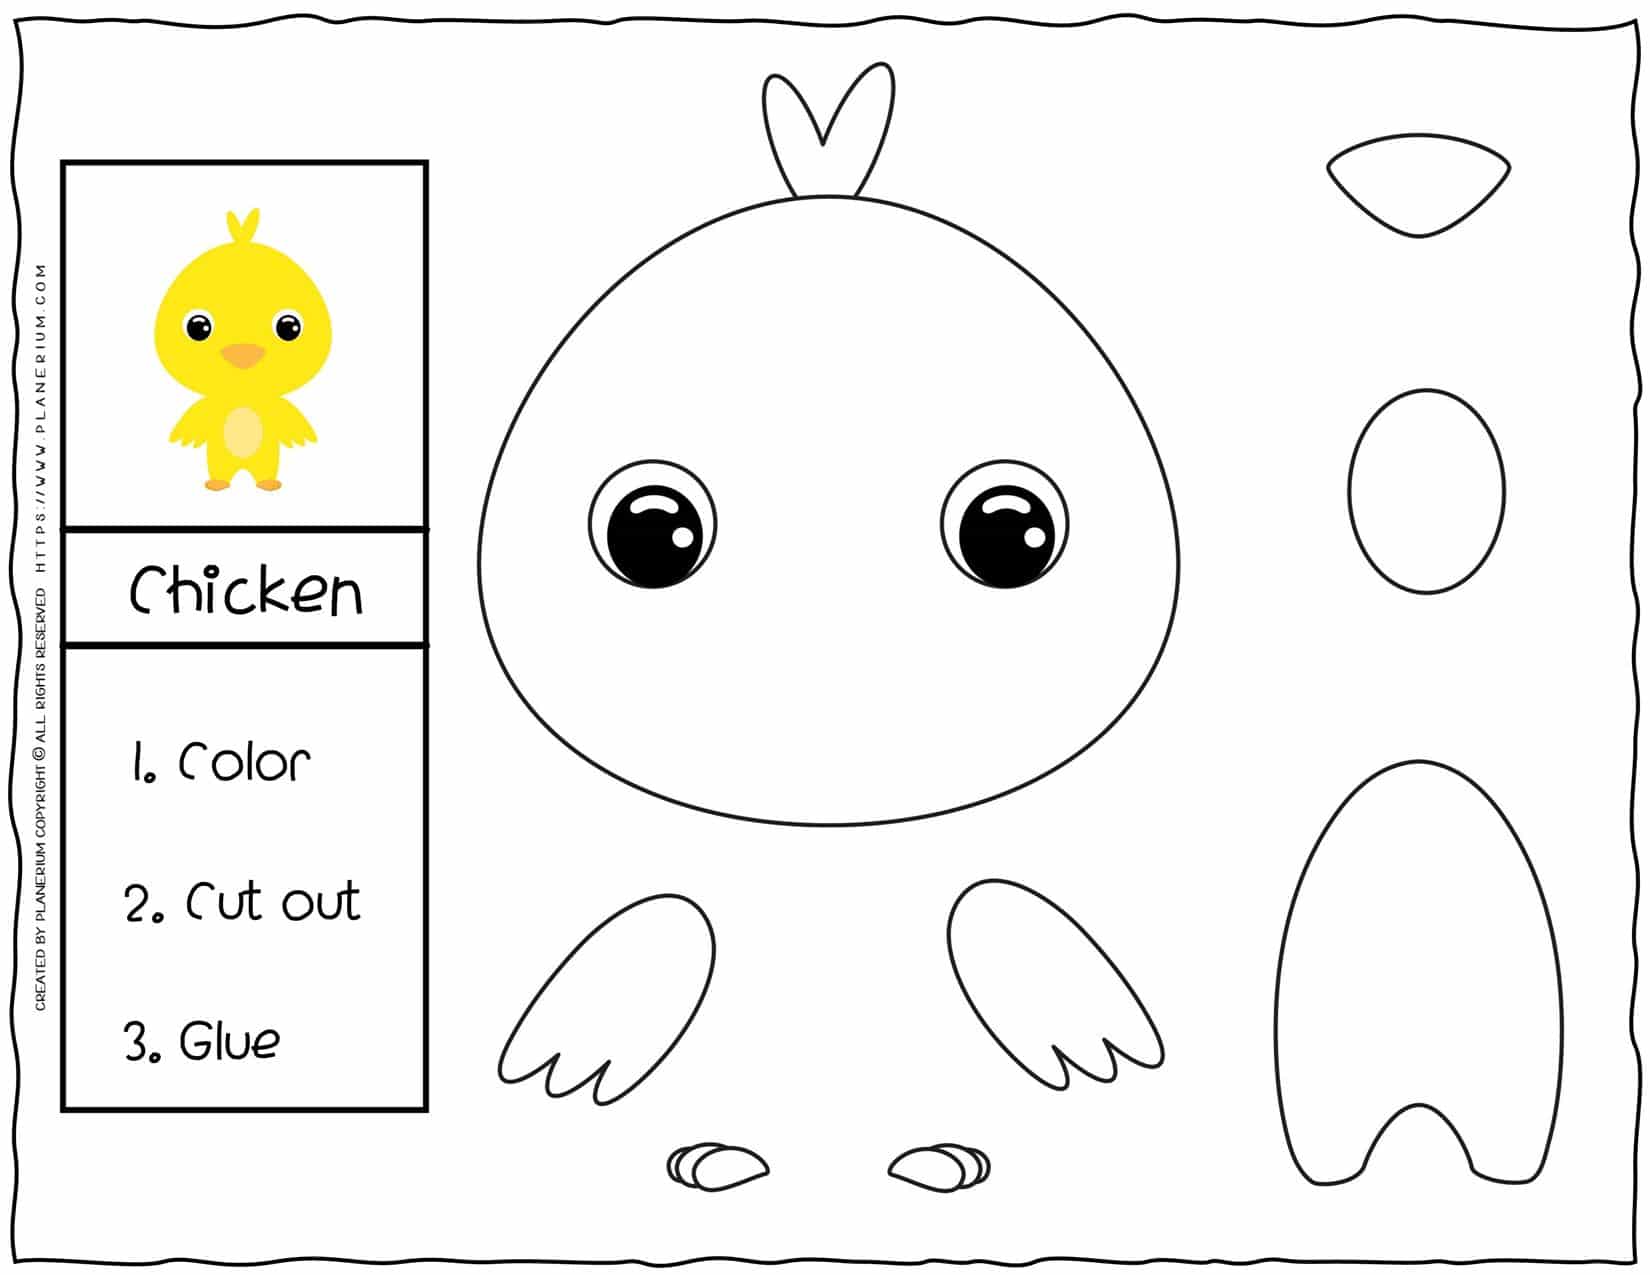 color-cut-and-paste-activity-worksheet-for-kids-cut-and-glue